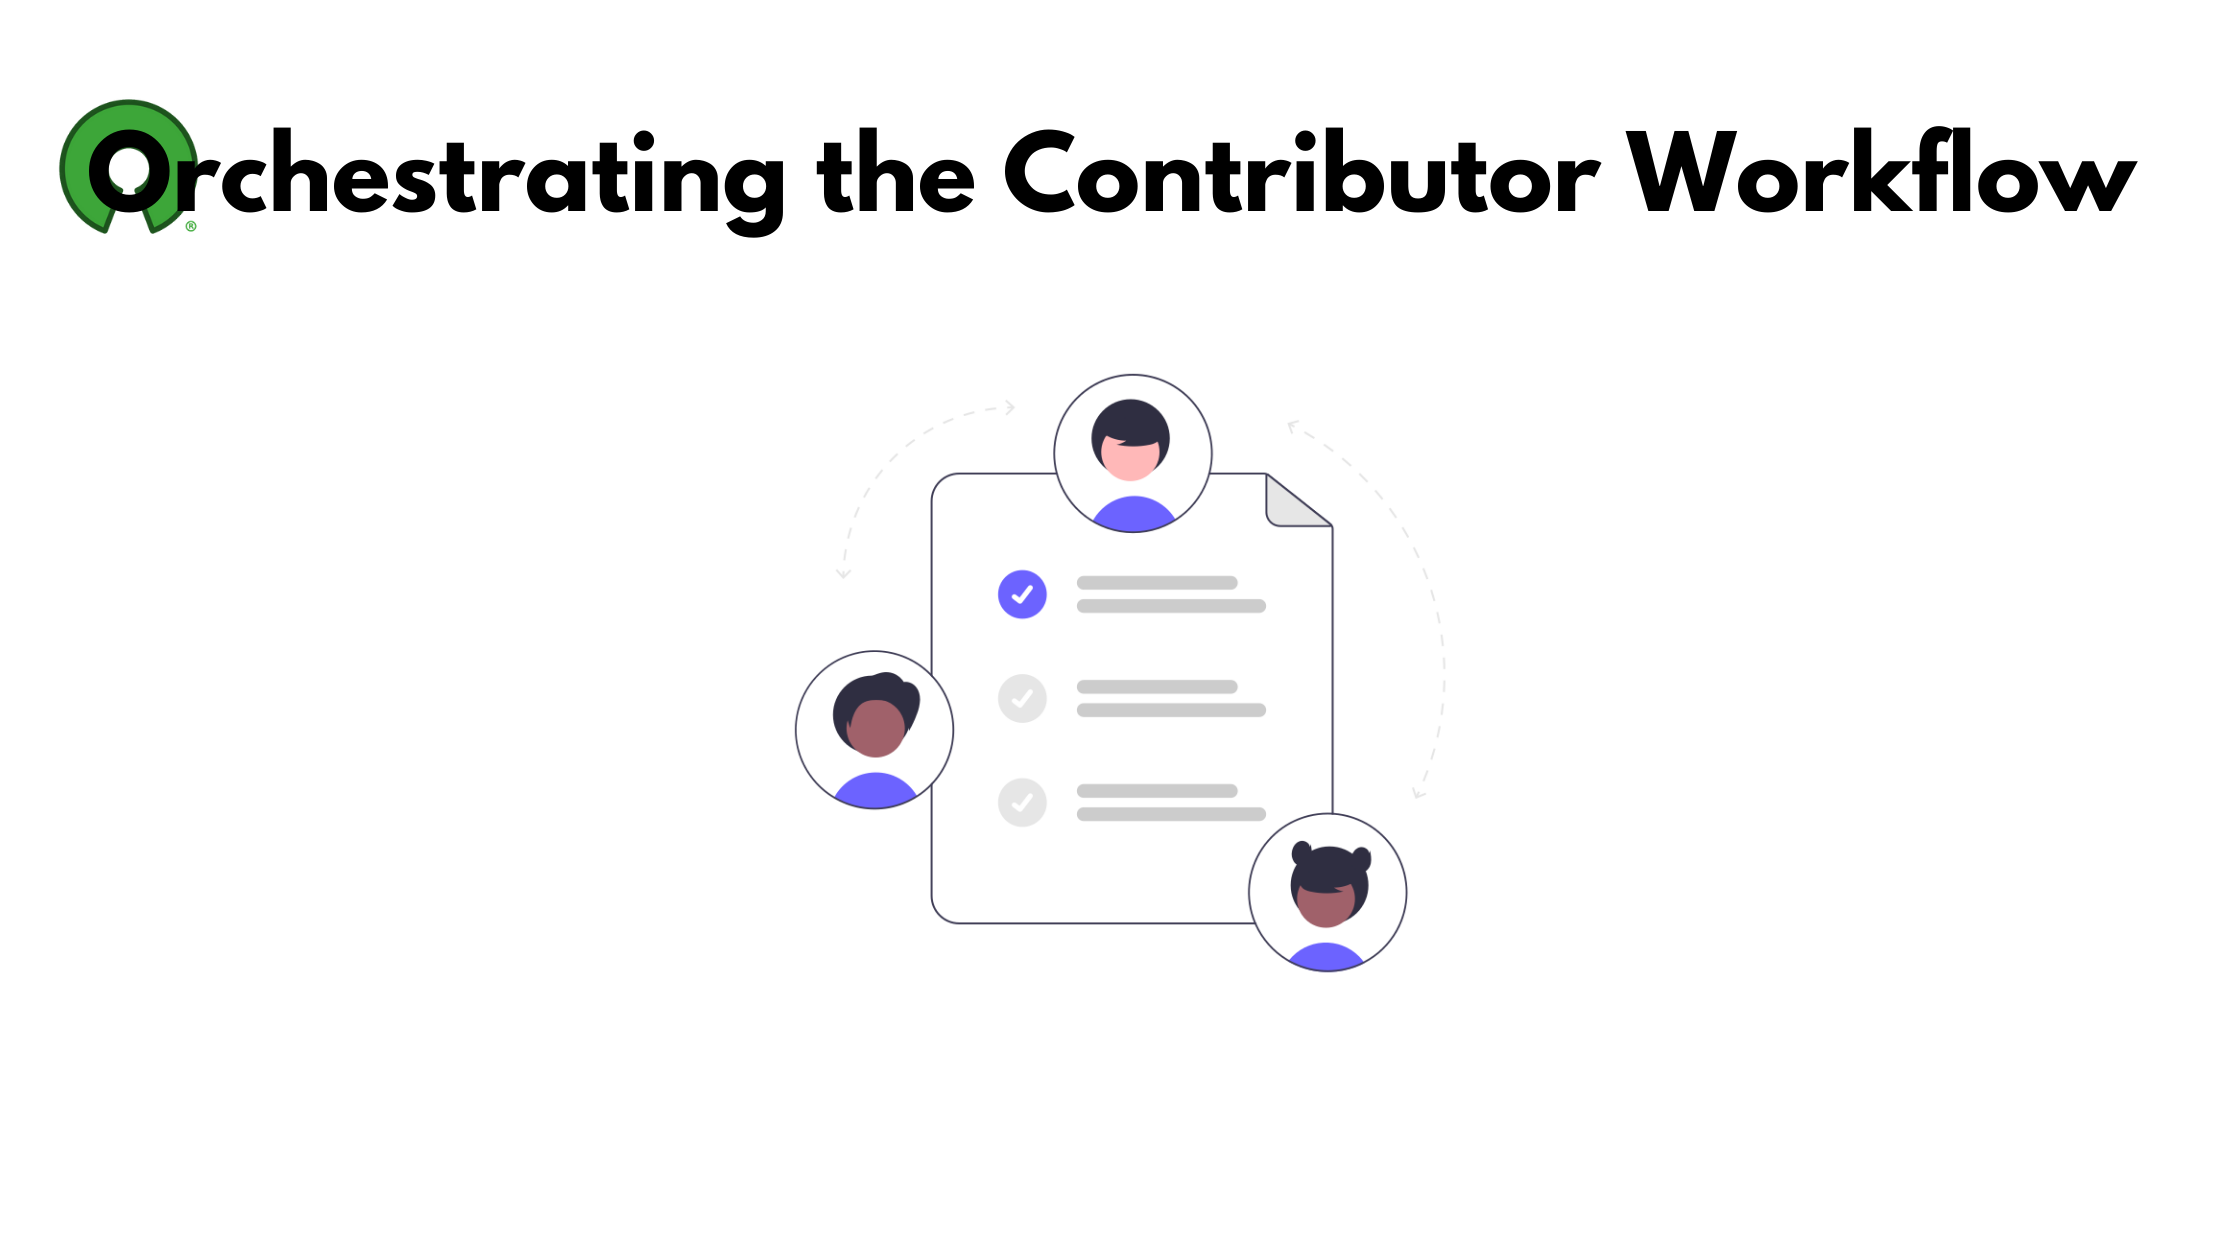 Making Open Source Easy - Orchestrating the Open Source Contribution Workflow - The Guild Blog